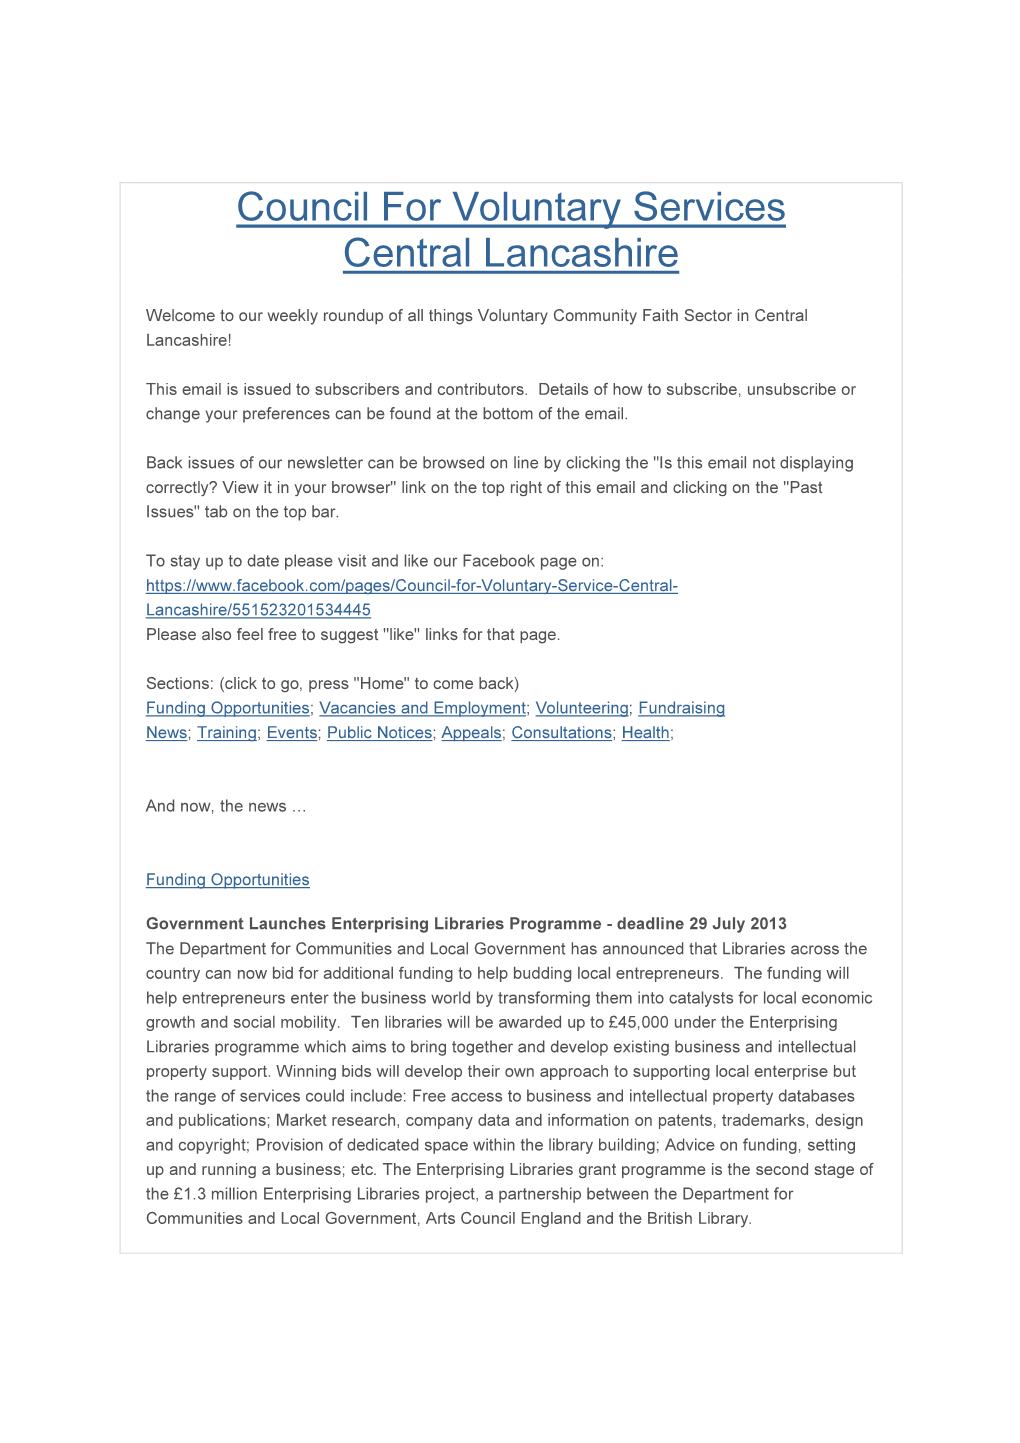 Council for Voluntary Services Central Lancashire